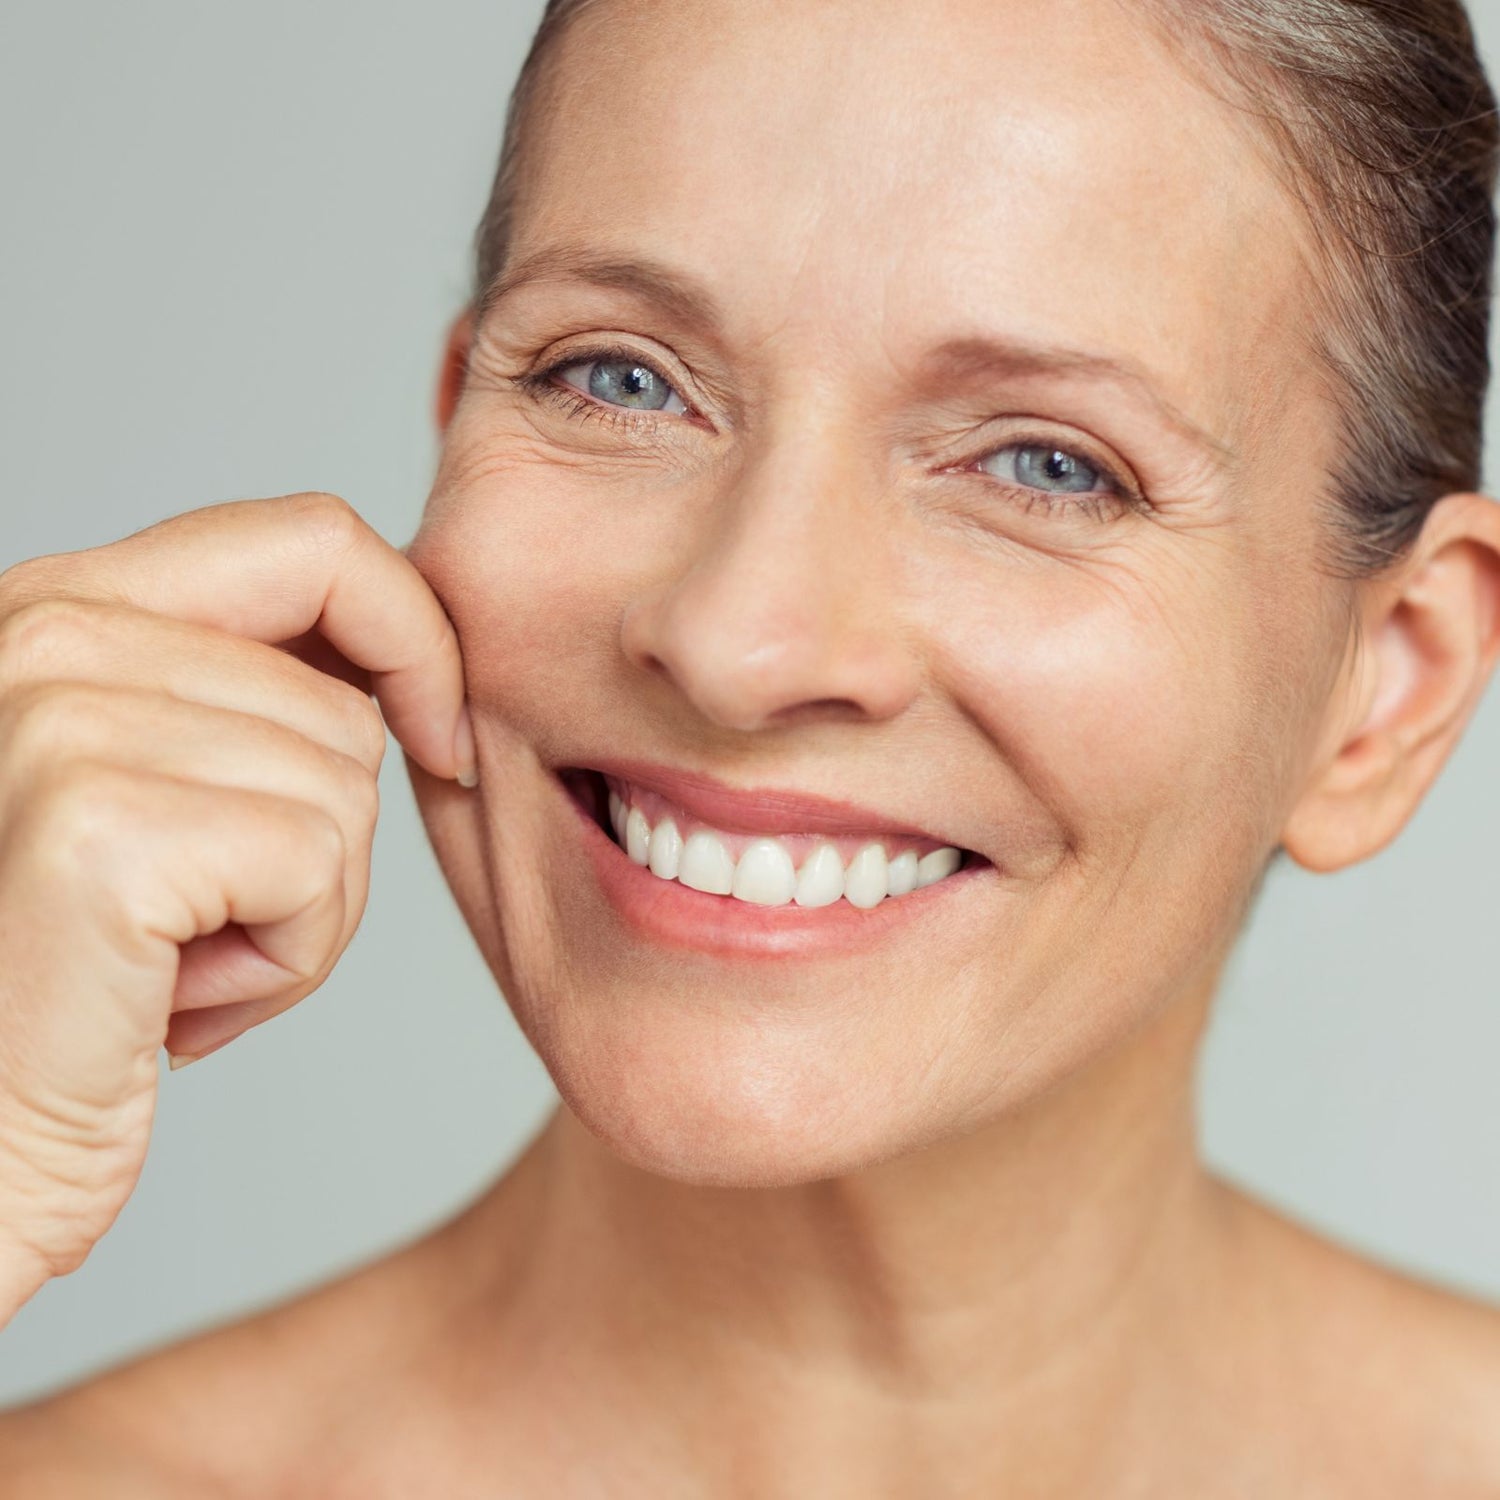 How To Slow Down The Ageing Process